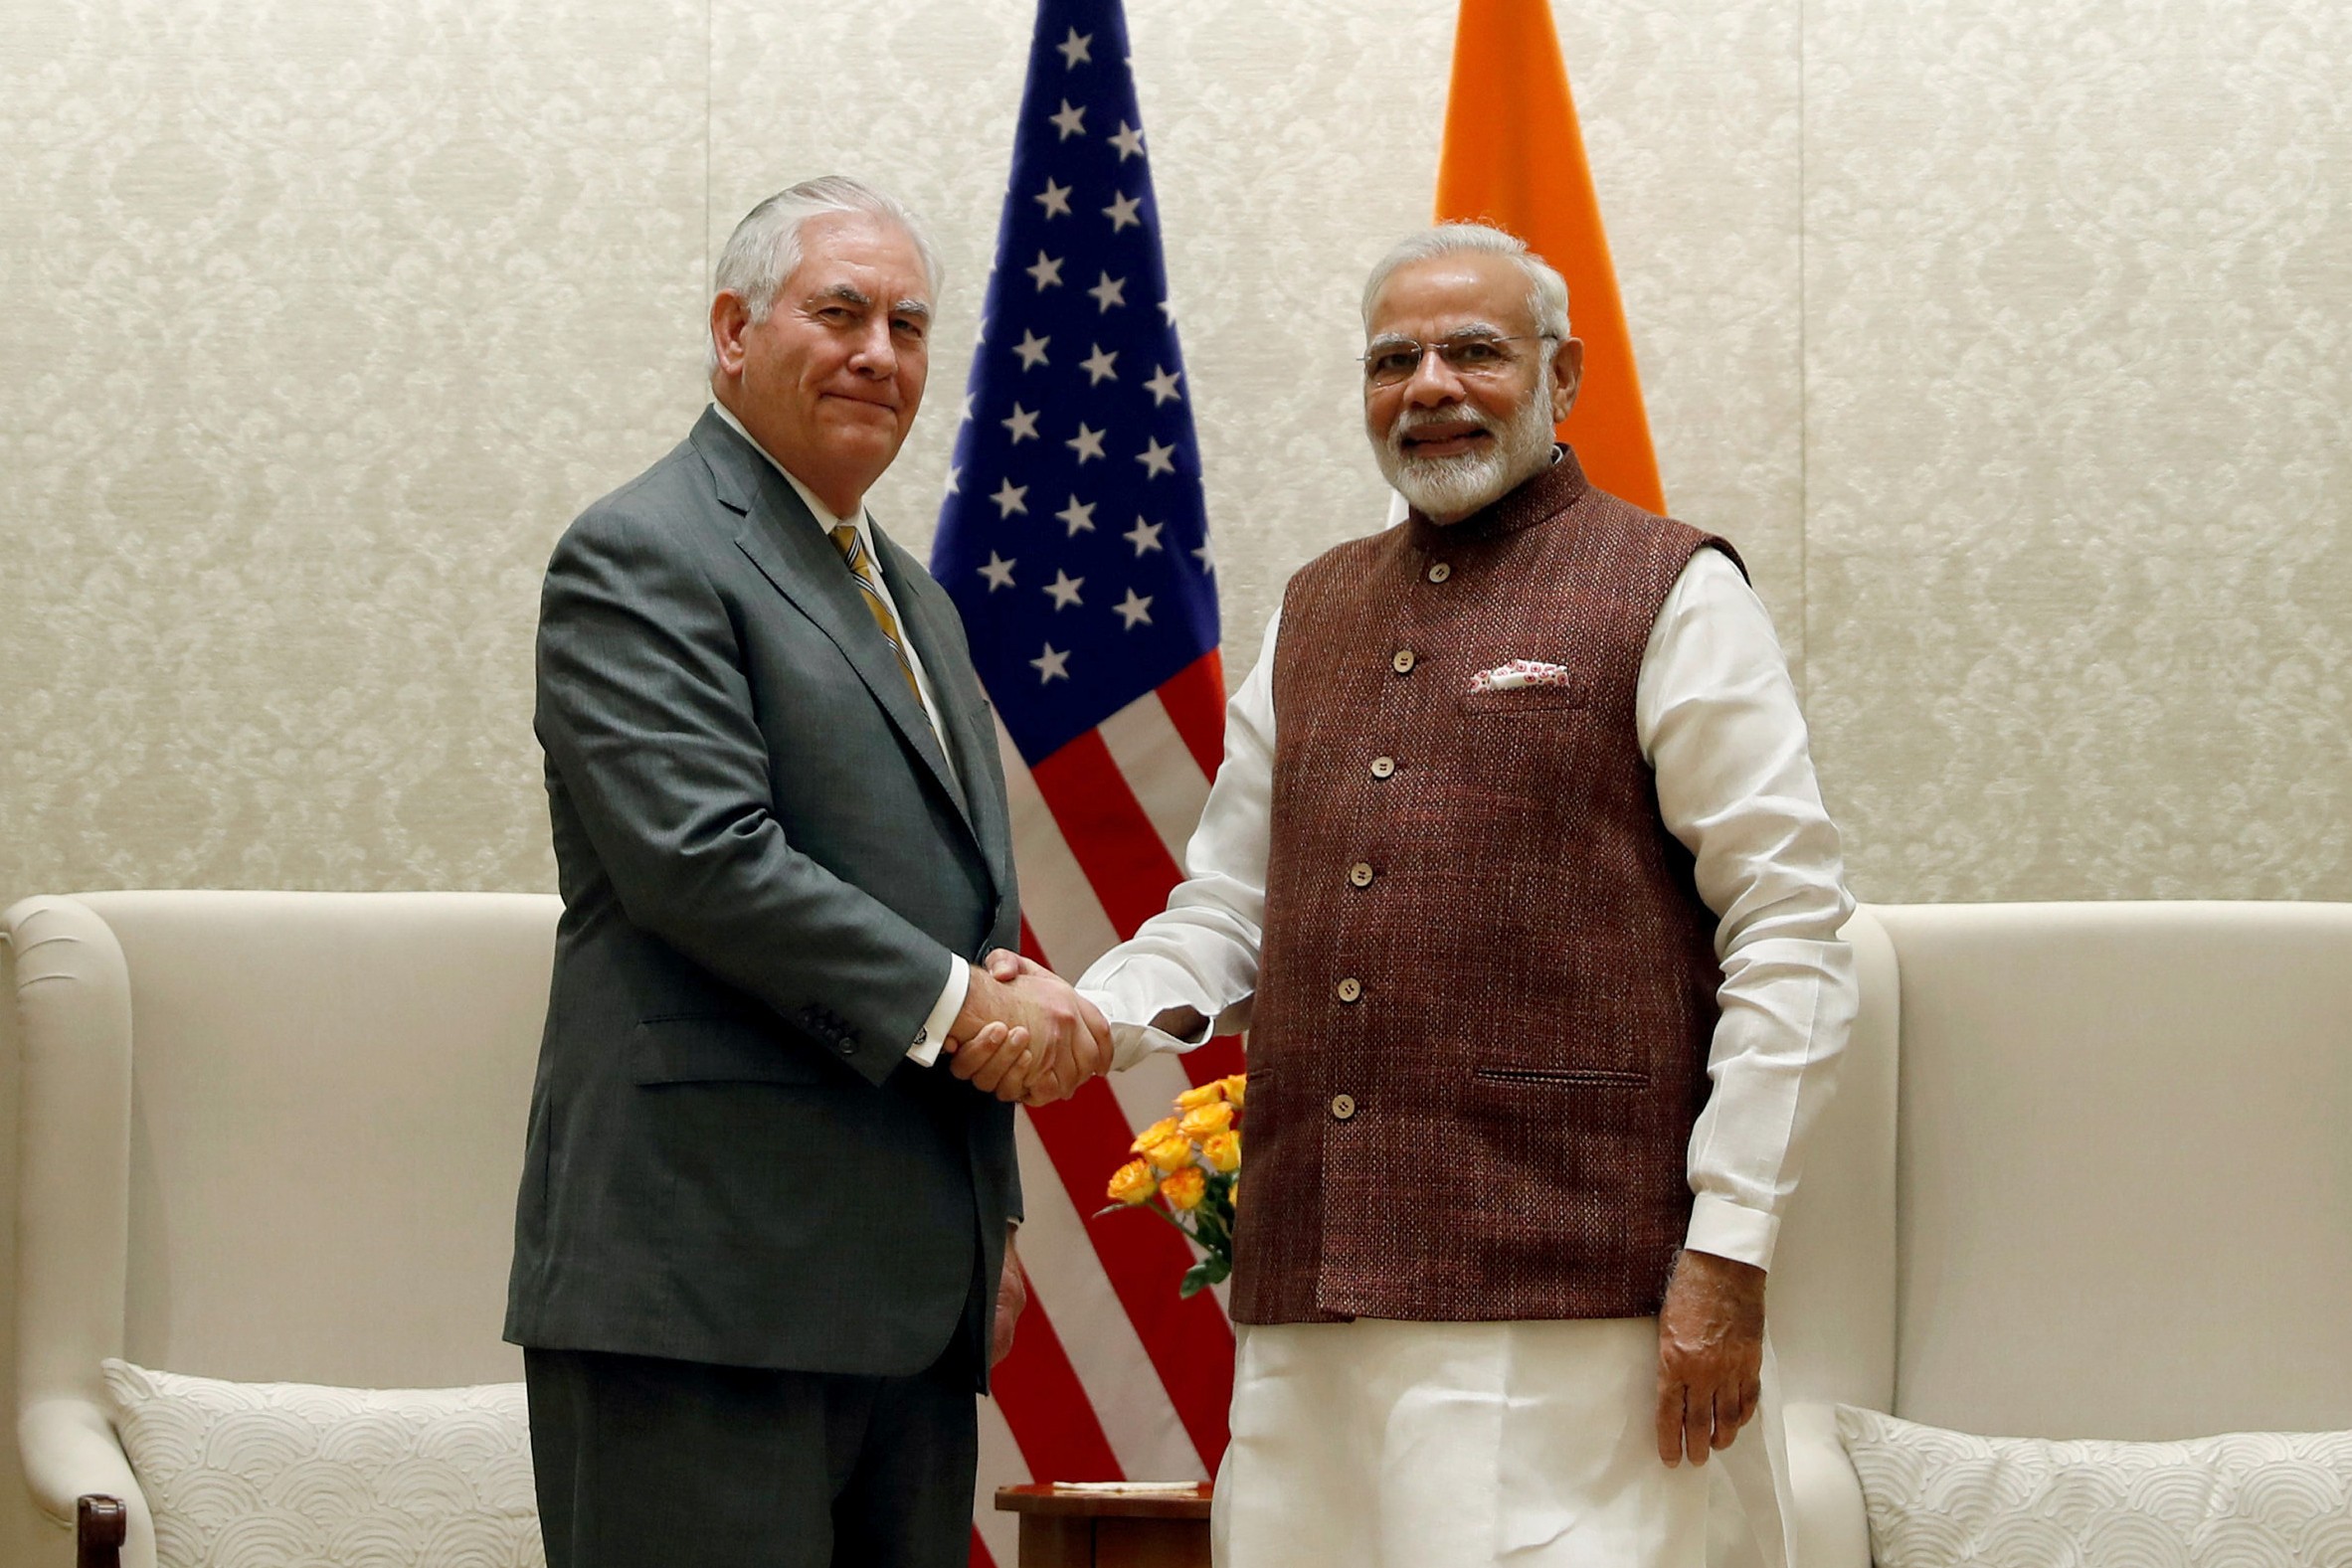 US Secretary of State Rex Tillerson and Indian Prime Minister Narendra Modi met in New Delhi, India. Photo: Reuters